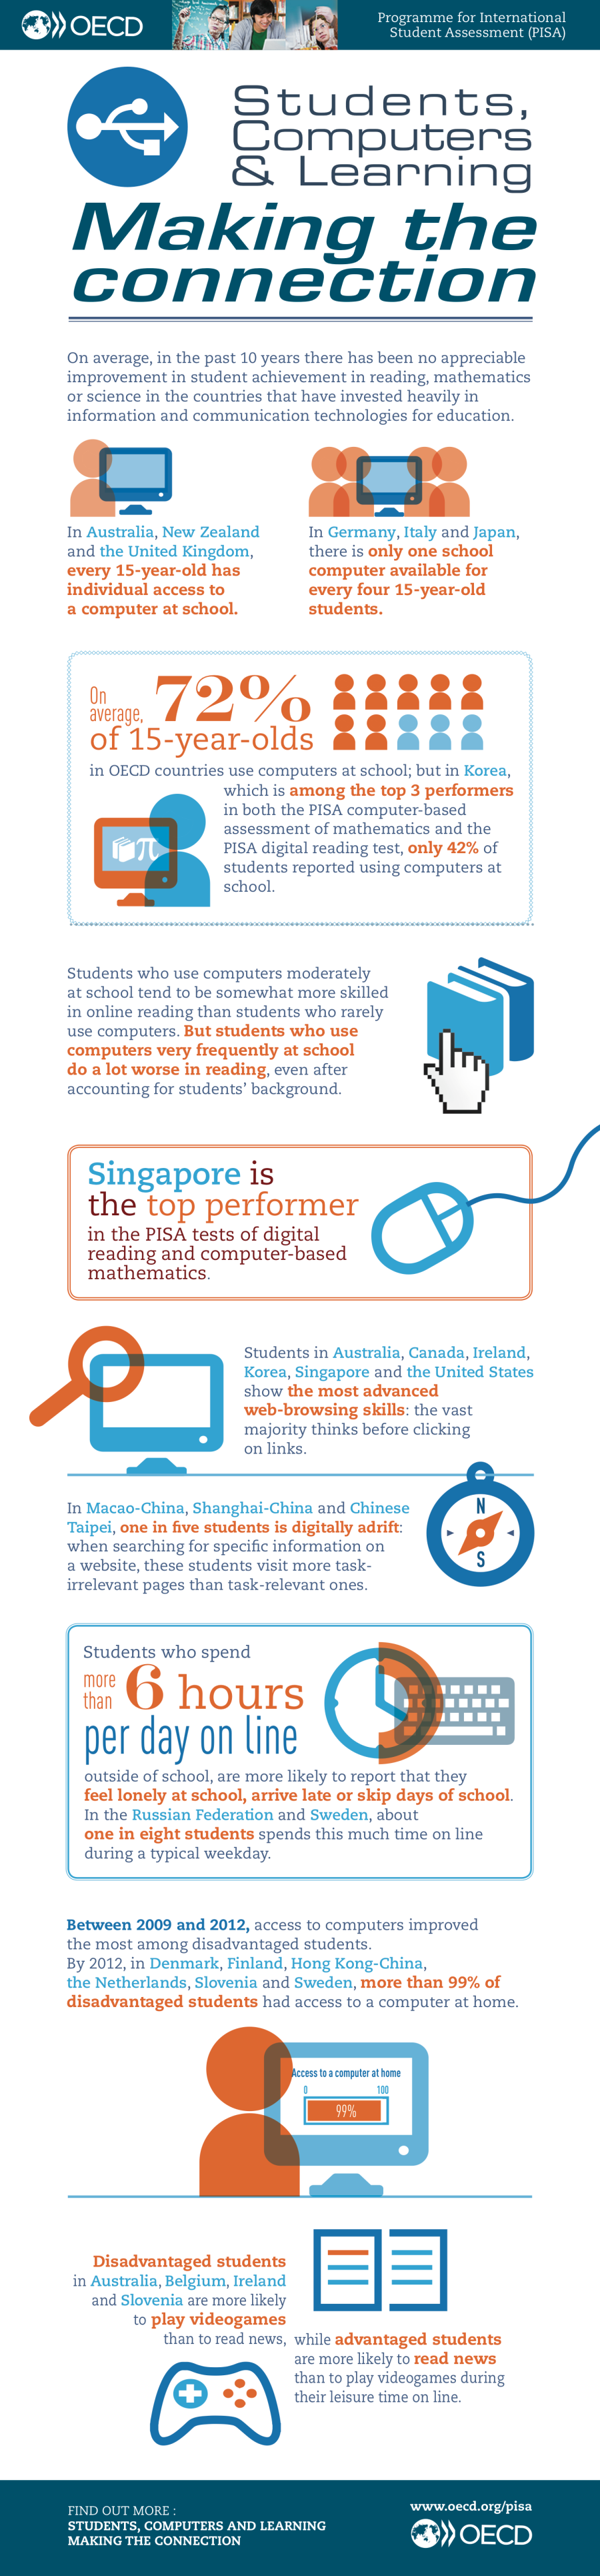 Students-Computers-Learning-Making-the-Connection-Infographic